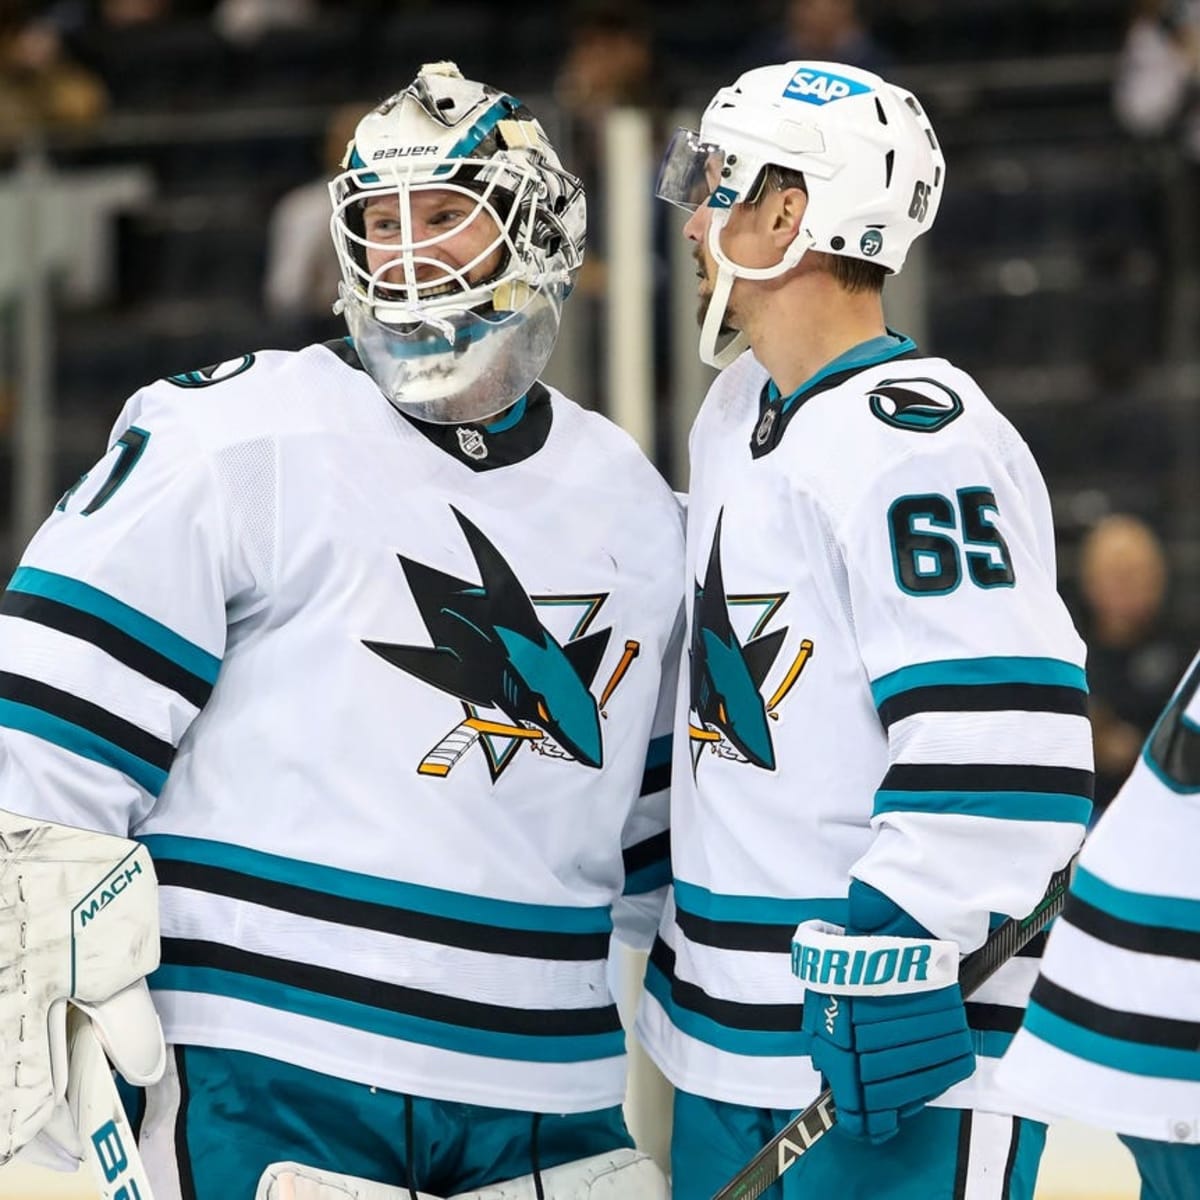 Golden Knights at Sharks Free Live Stream NHL Online - How to Watch and Stream Major League and College Sports